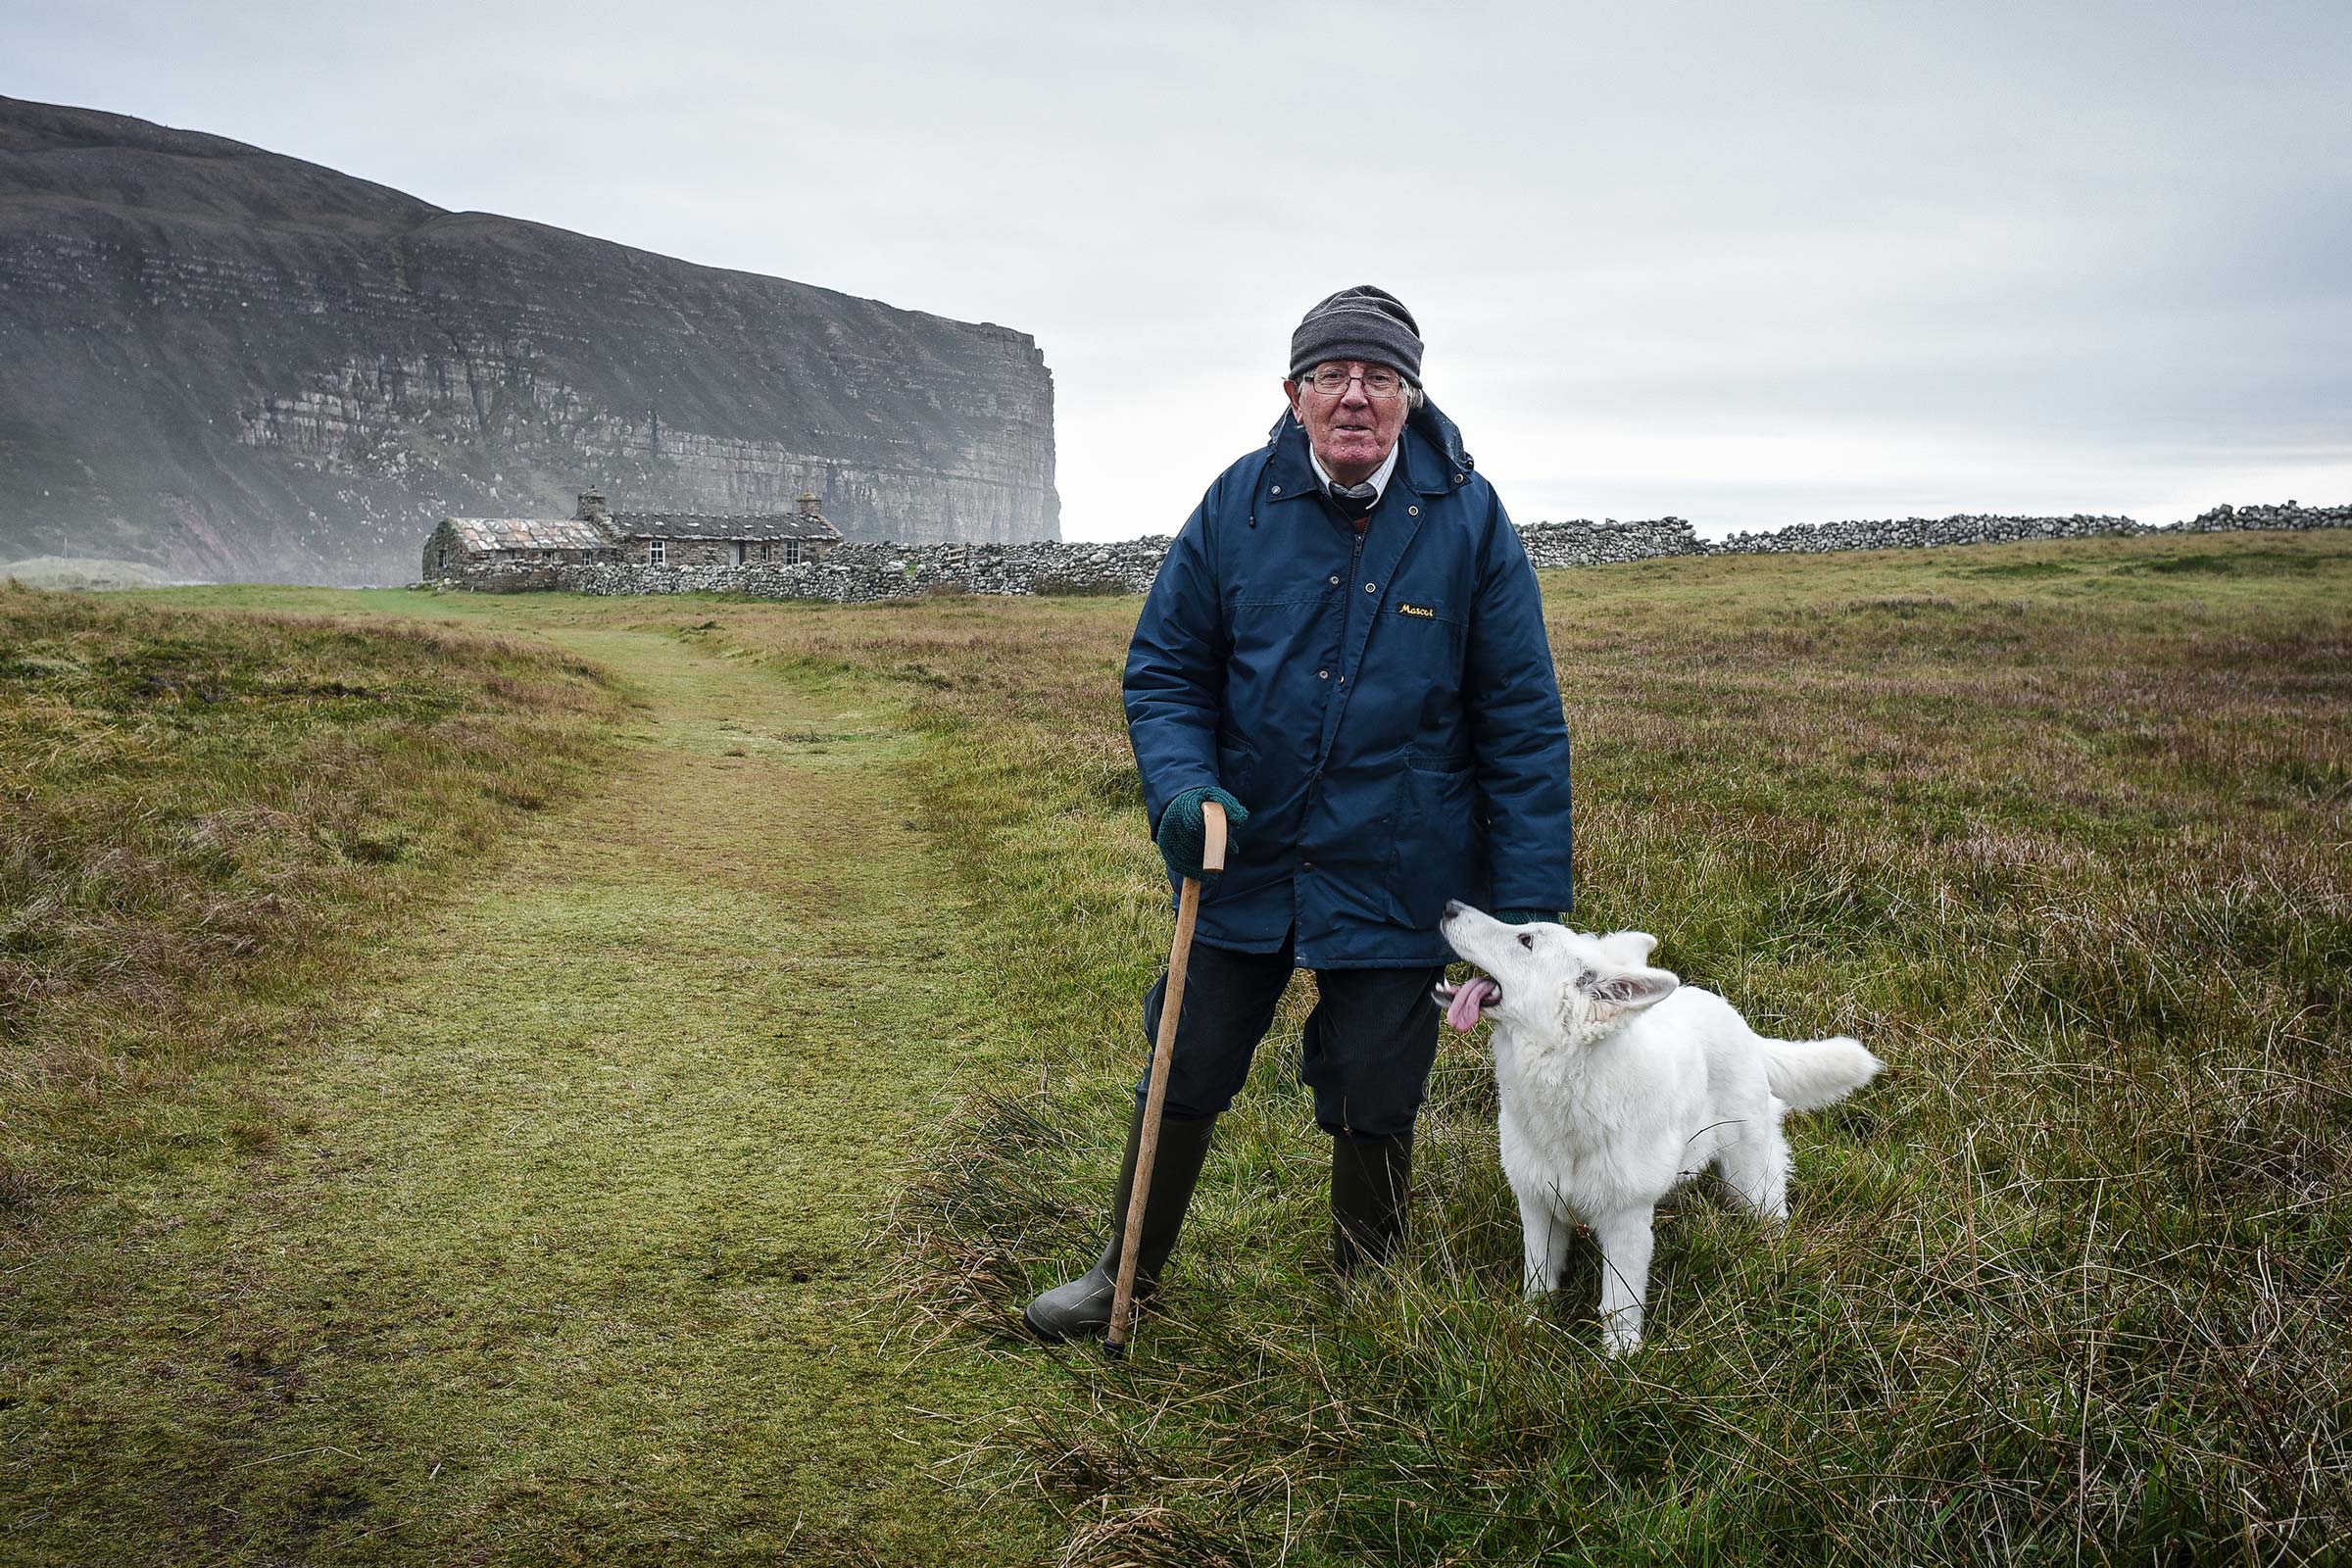 Jeff Clark stands in a field with a white dog